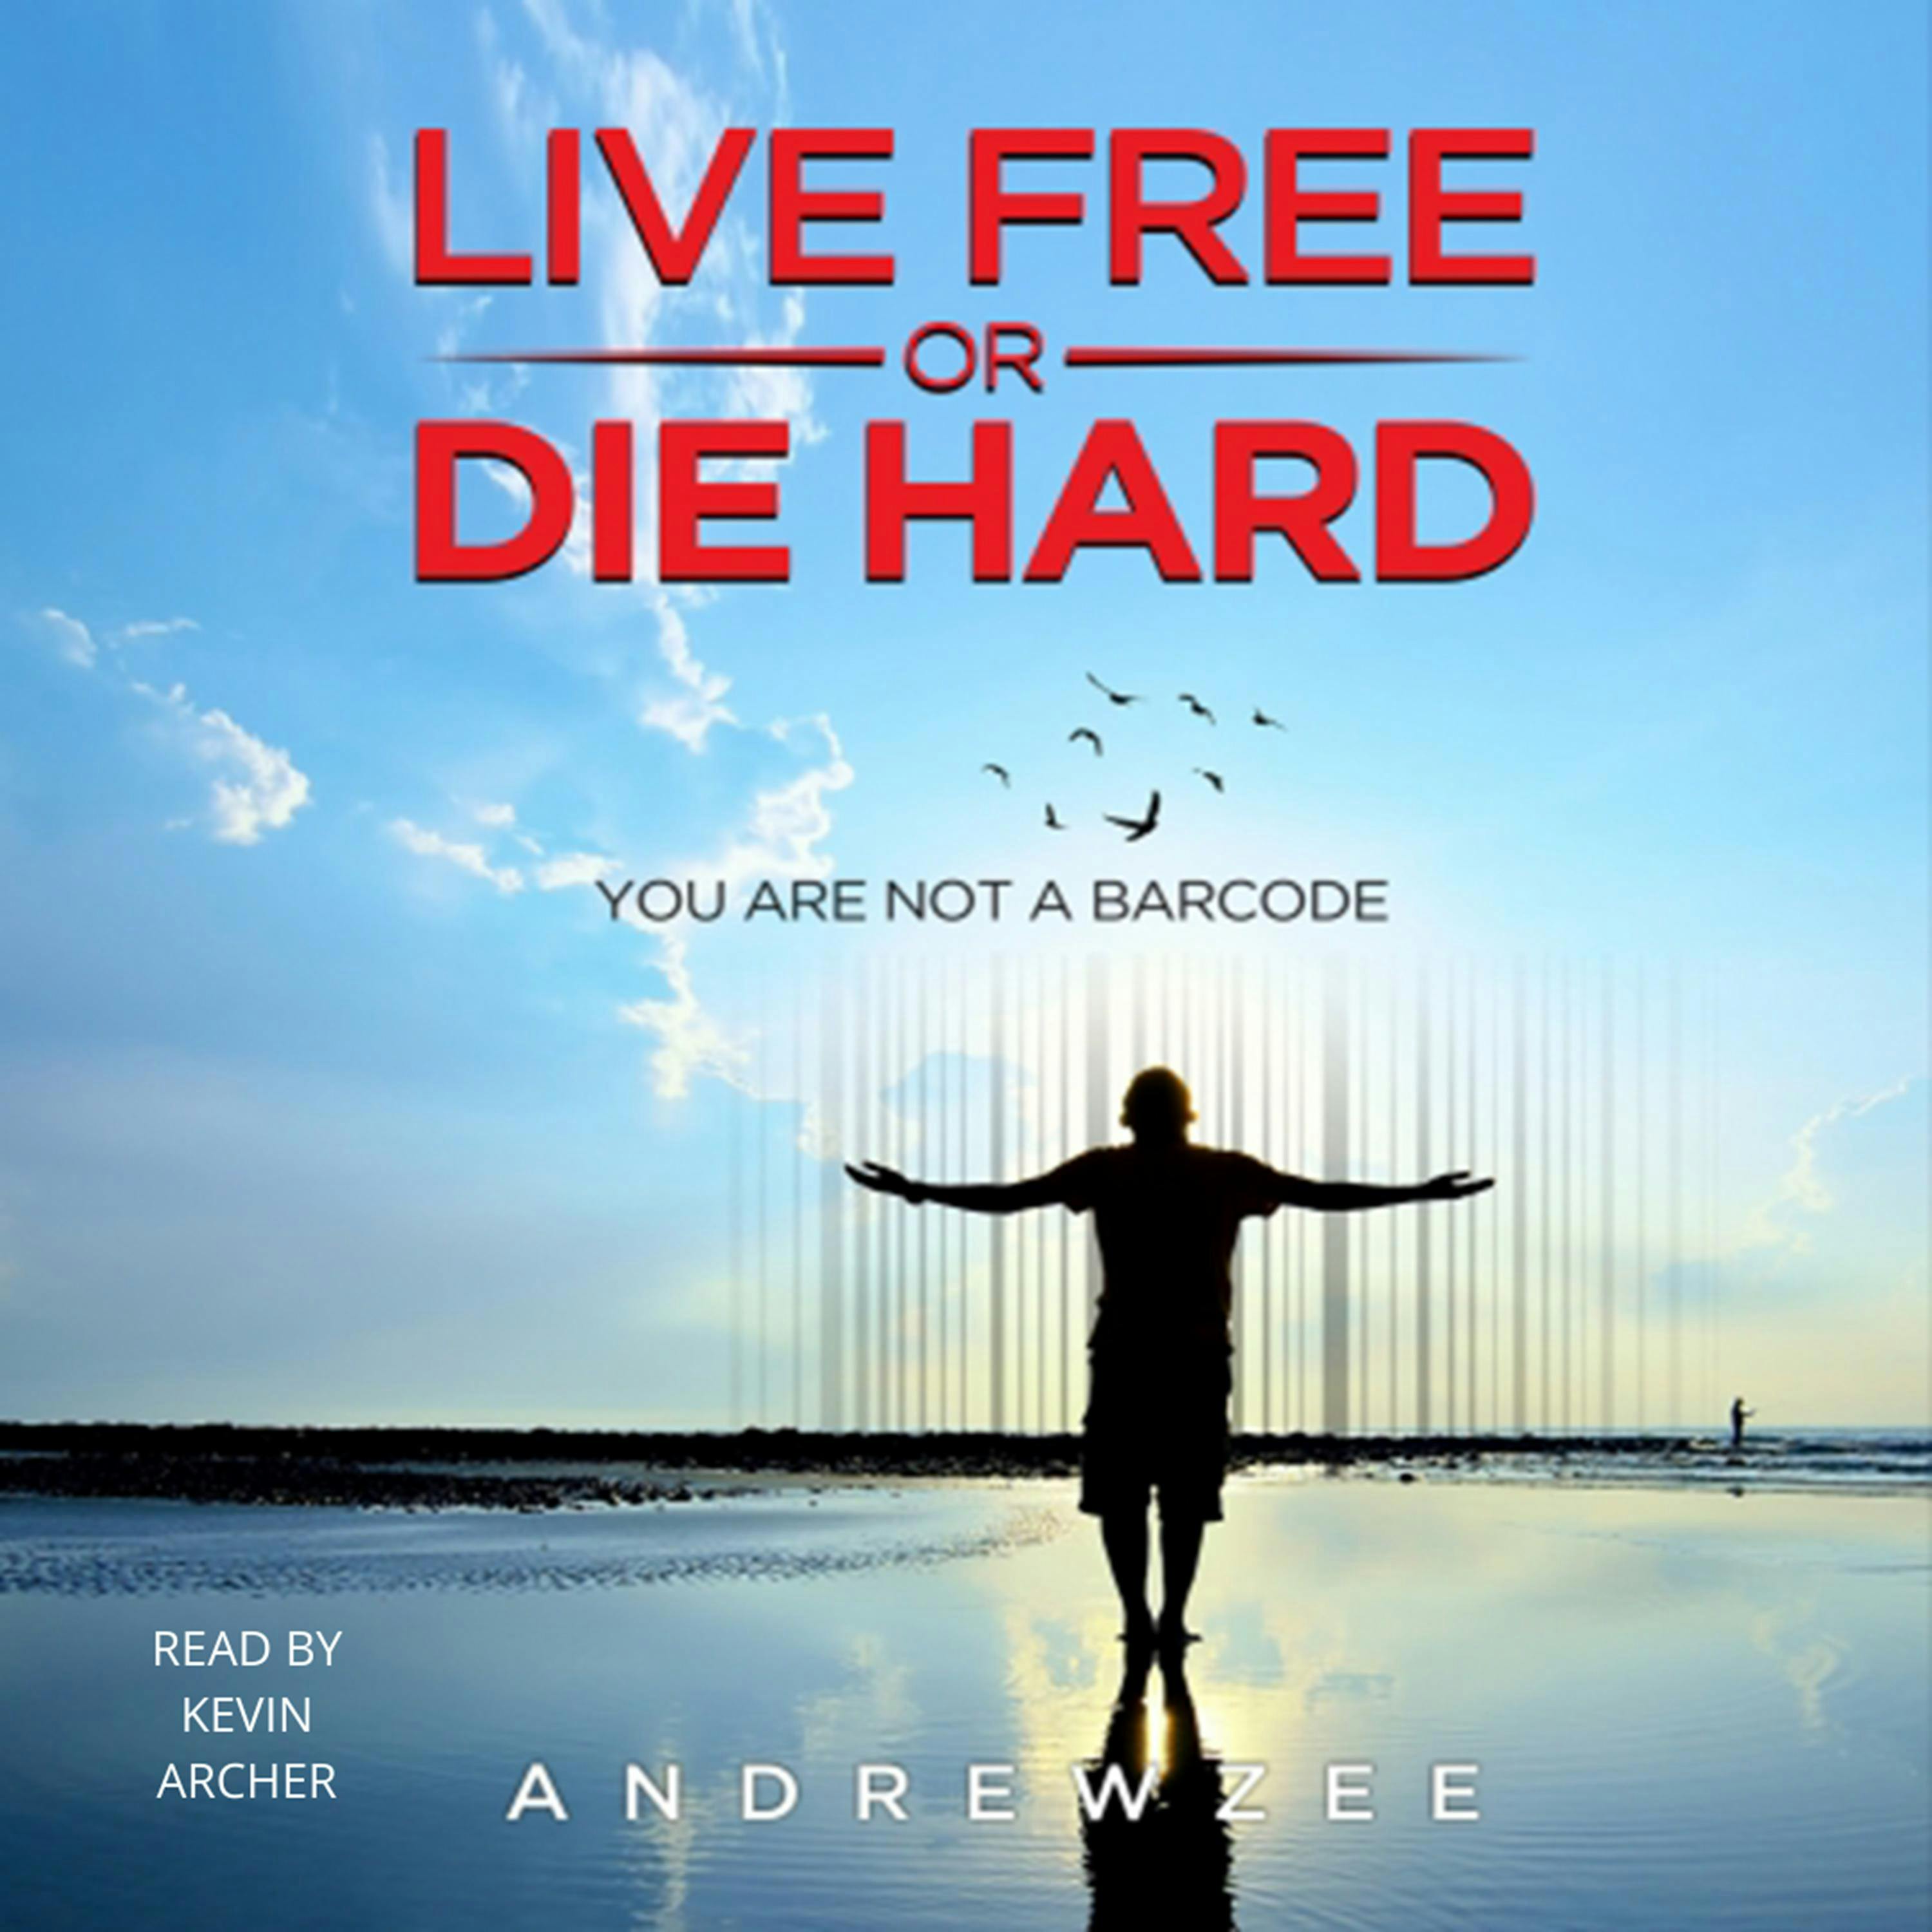 Live Free or Die Hard: You are not a barcode - undefined